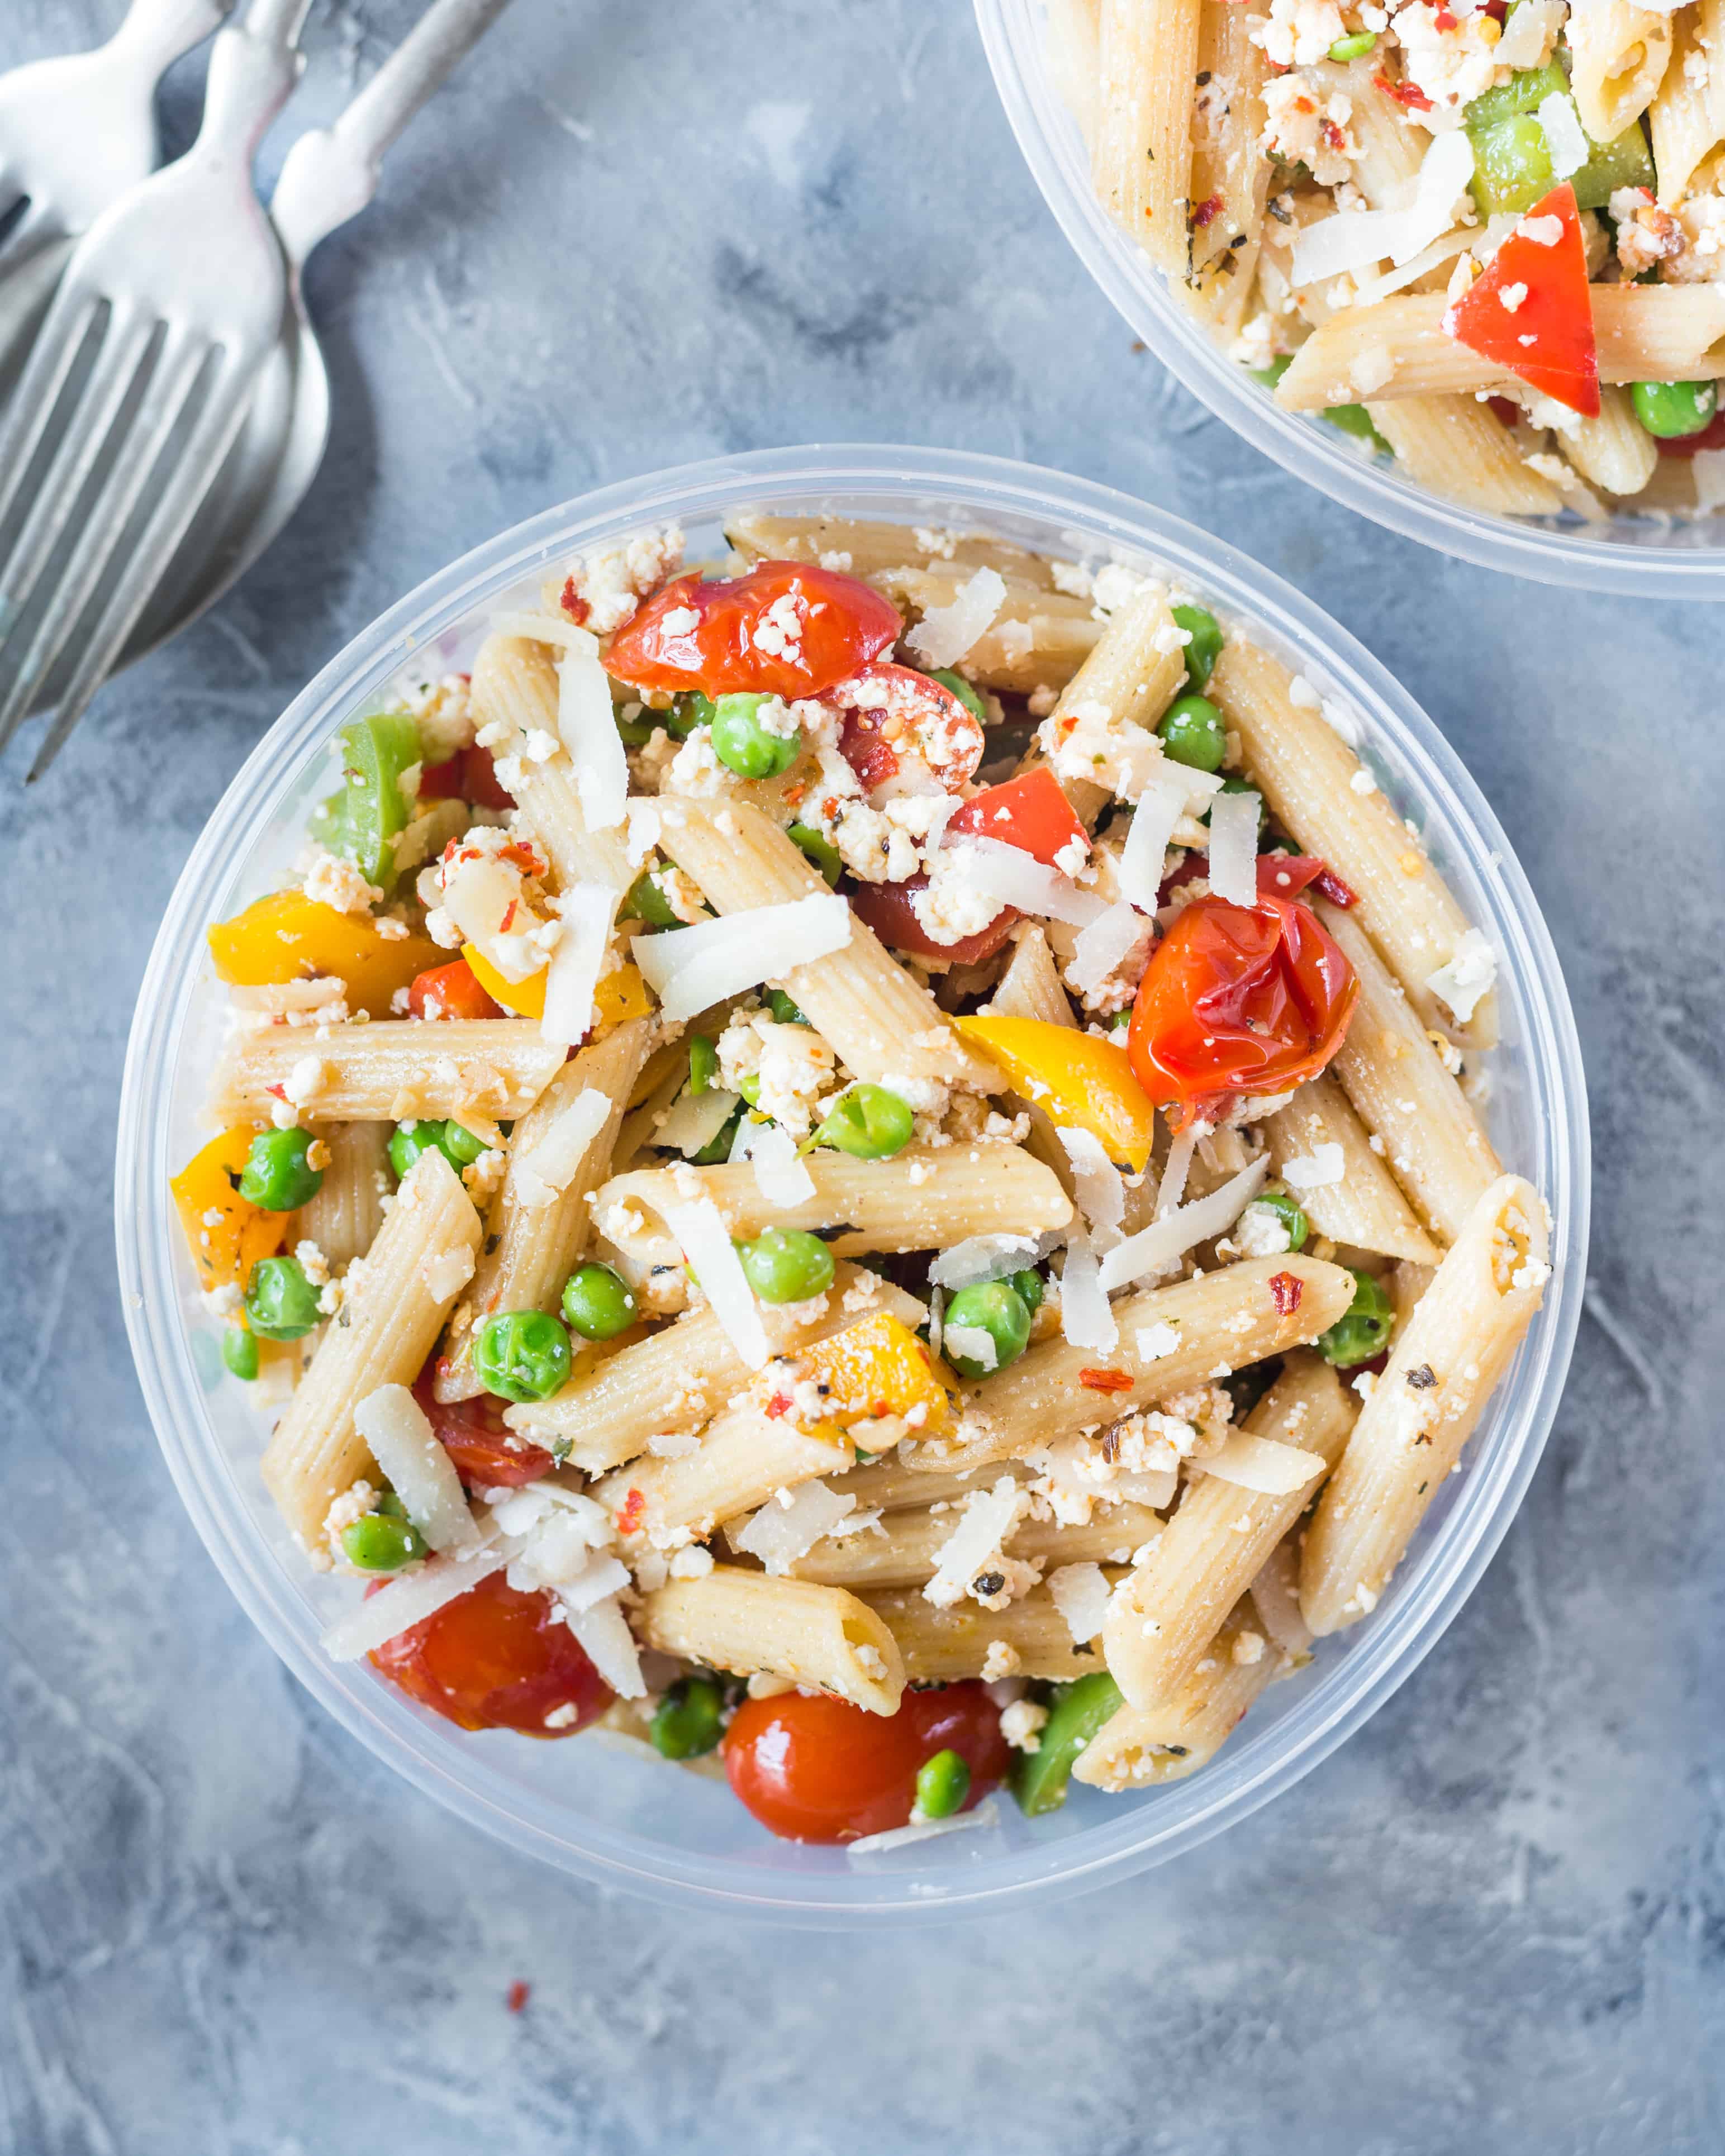 Vibrant and colorful, cold pasta salad made with soft ricotta cheese is served in a bowl.